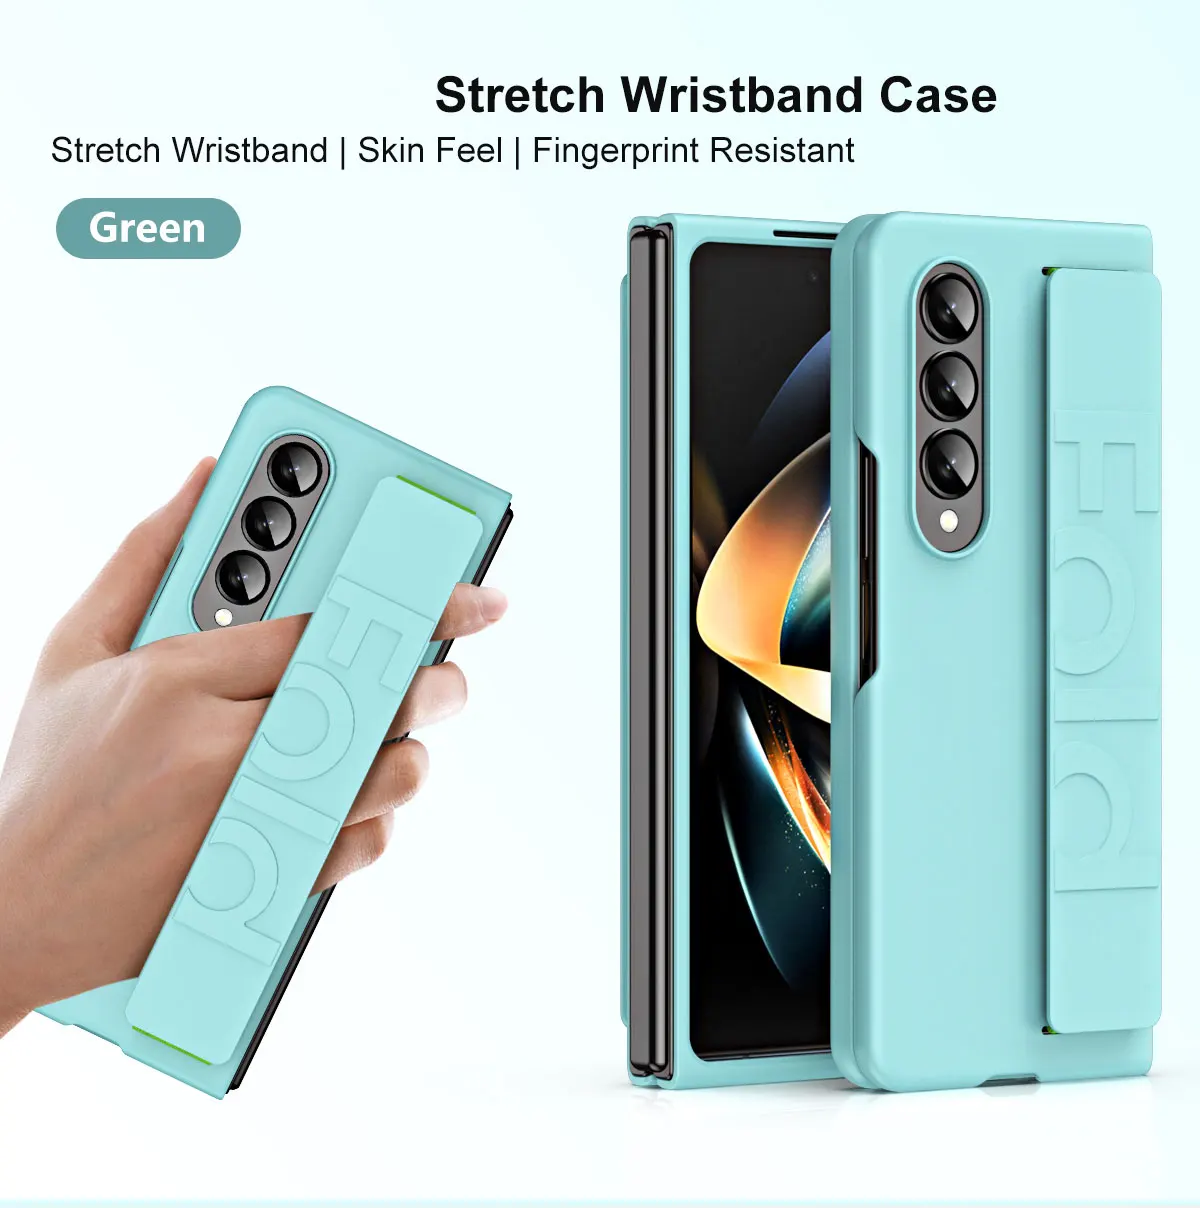 

Shockproof Stretch Wristband Case For Samsung Galaxy Z Fold 6 5 4 3 2 5G Fold6 Case with Wrist Strap Hard PC Plastic Matte Cover